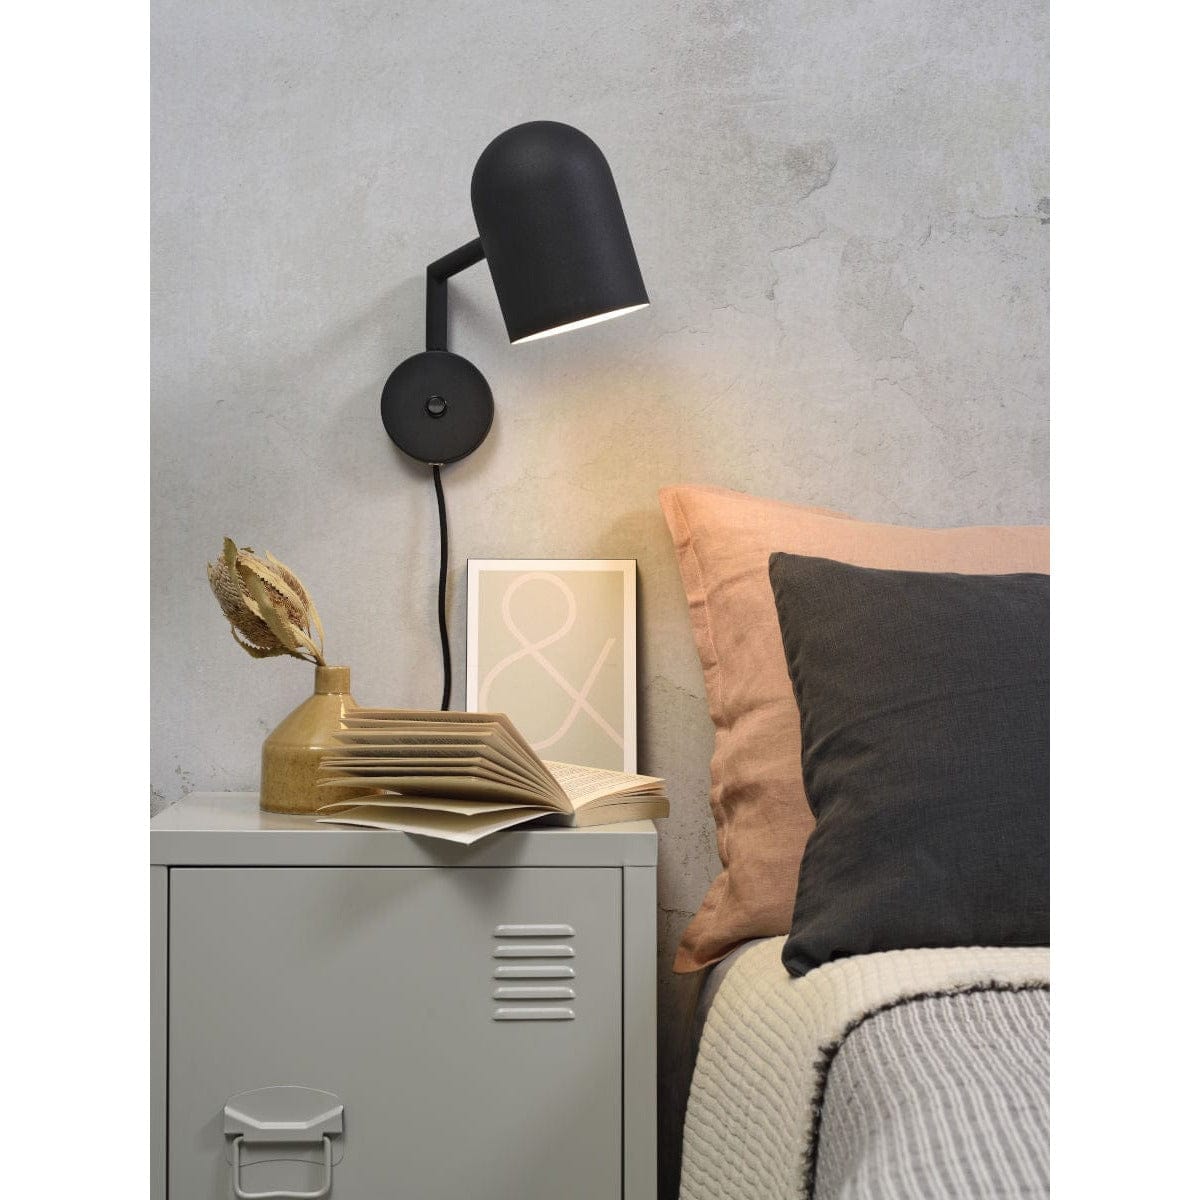 It's About RoMi Wall Lights Marseille Wall Lamp, Black, Sand or Terra